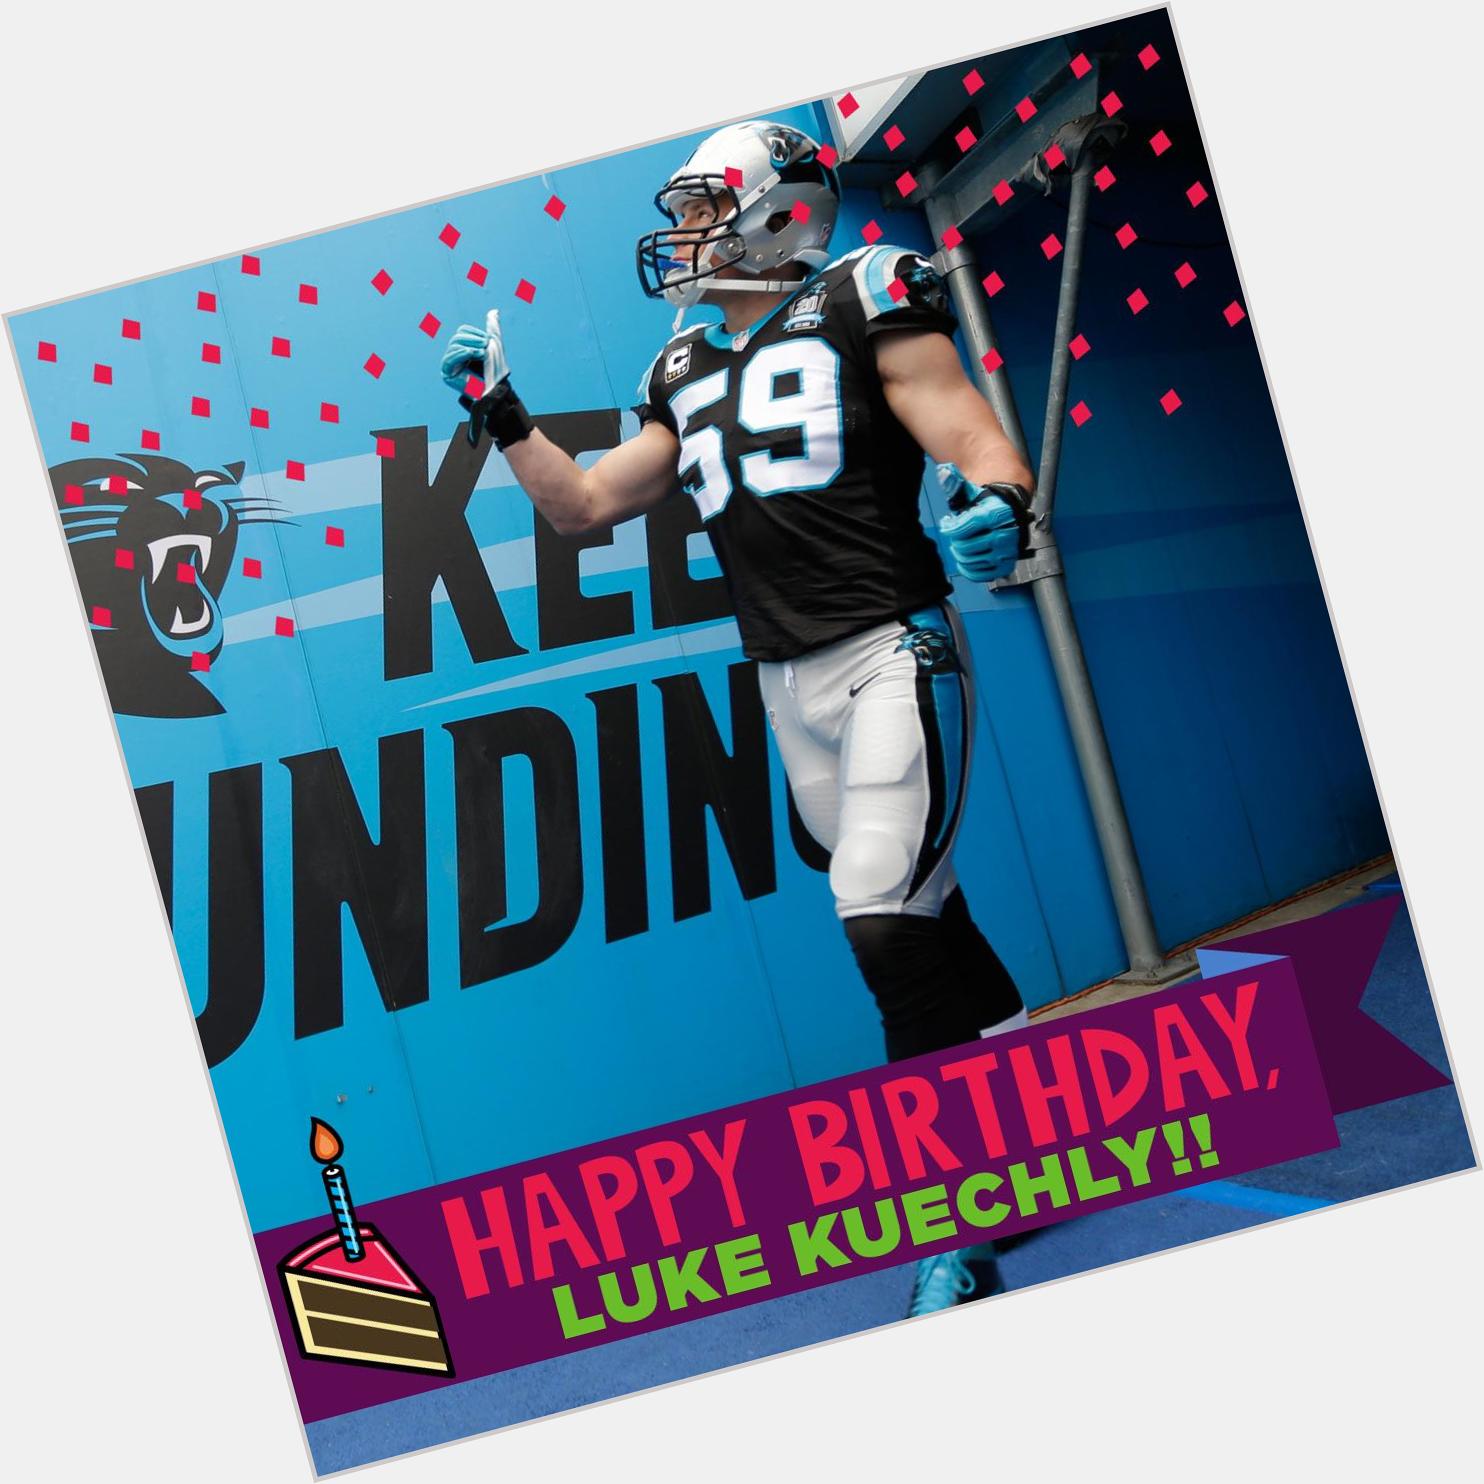 Luke Kuechly can eat a dick today and every day. Happy Birthday to LB  